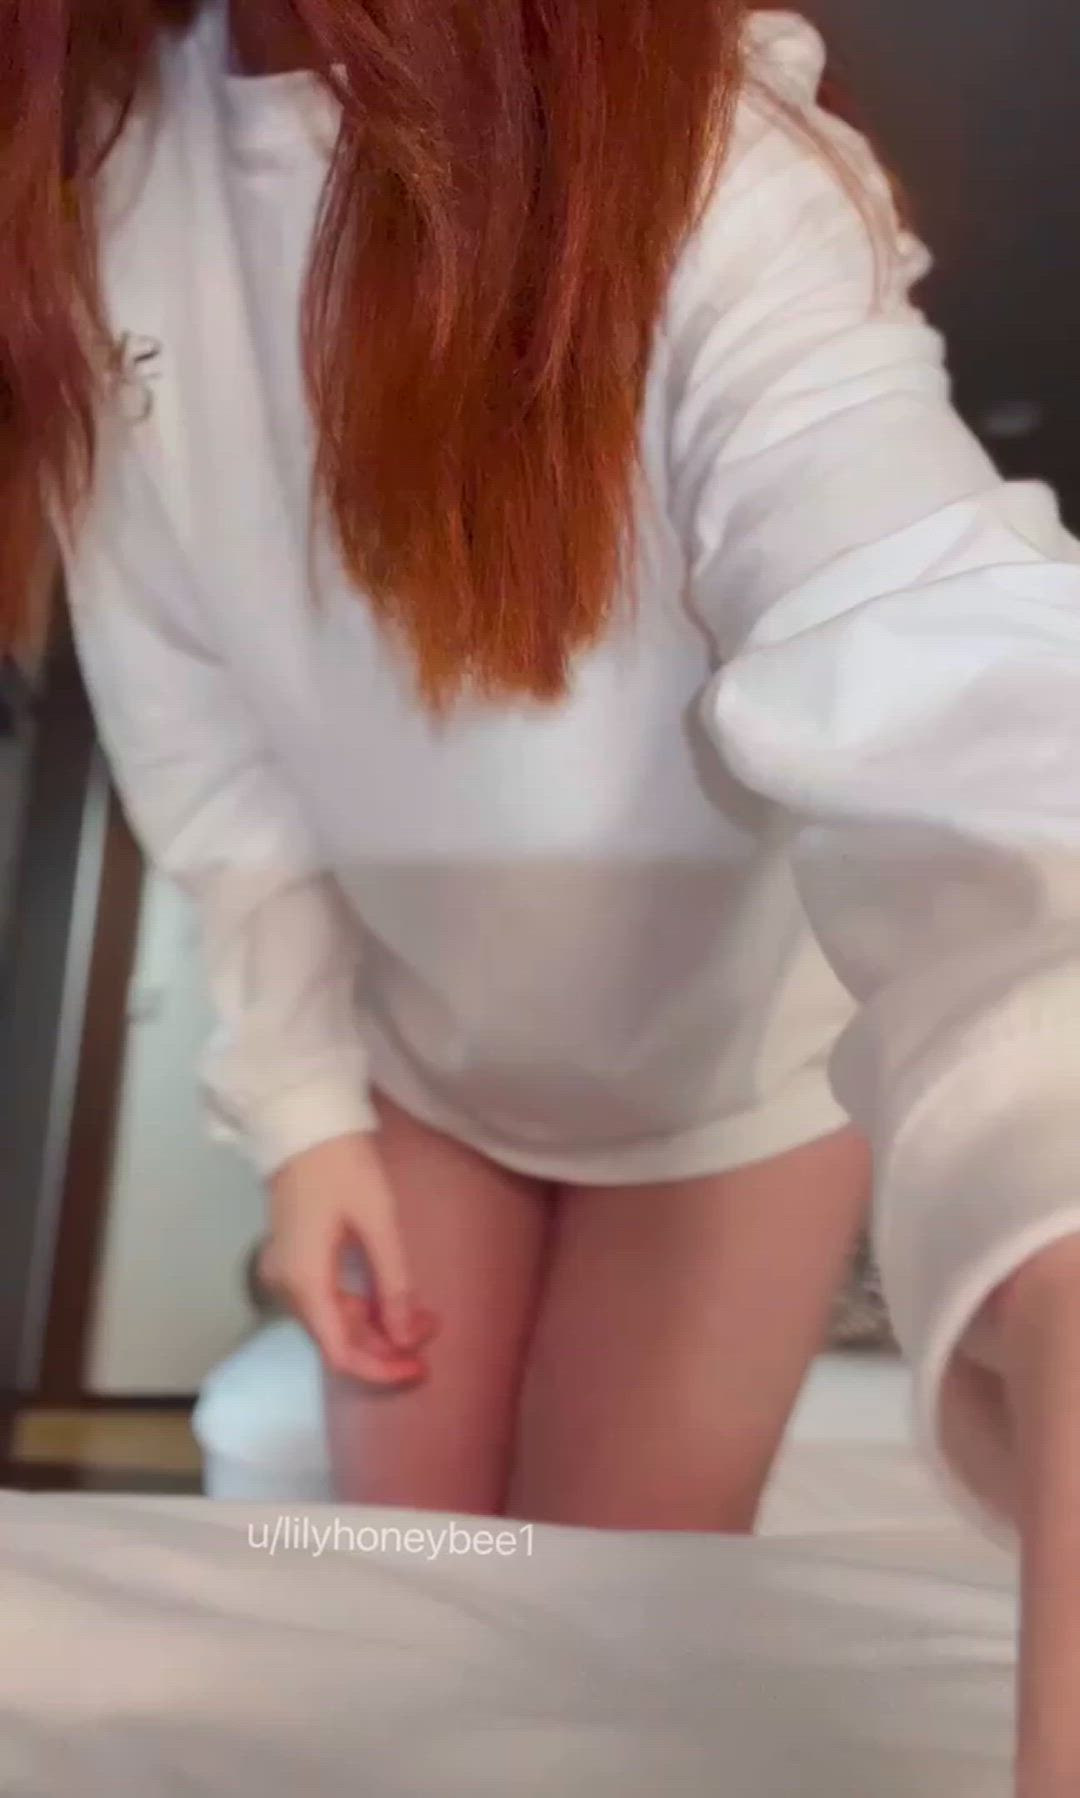 Cute porn video with onlyfans model  <strong>@lilyhoneybee</strong>